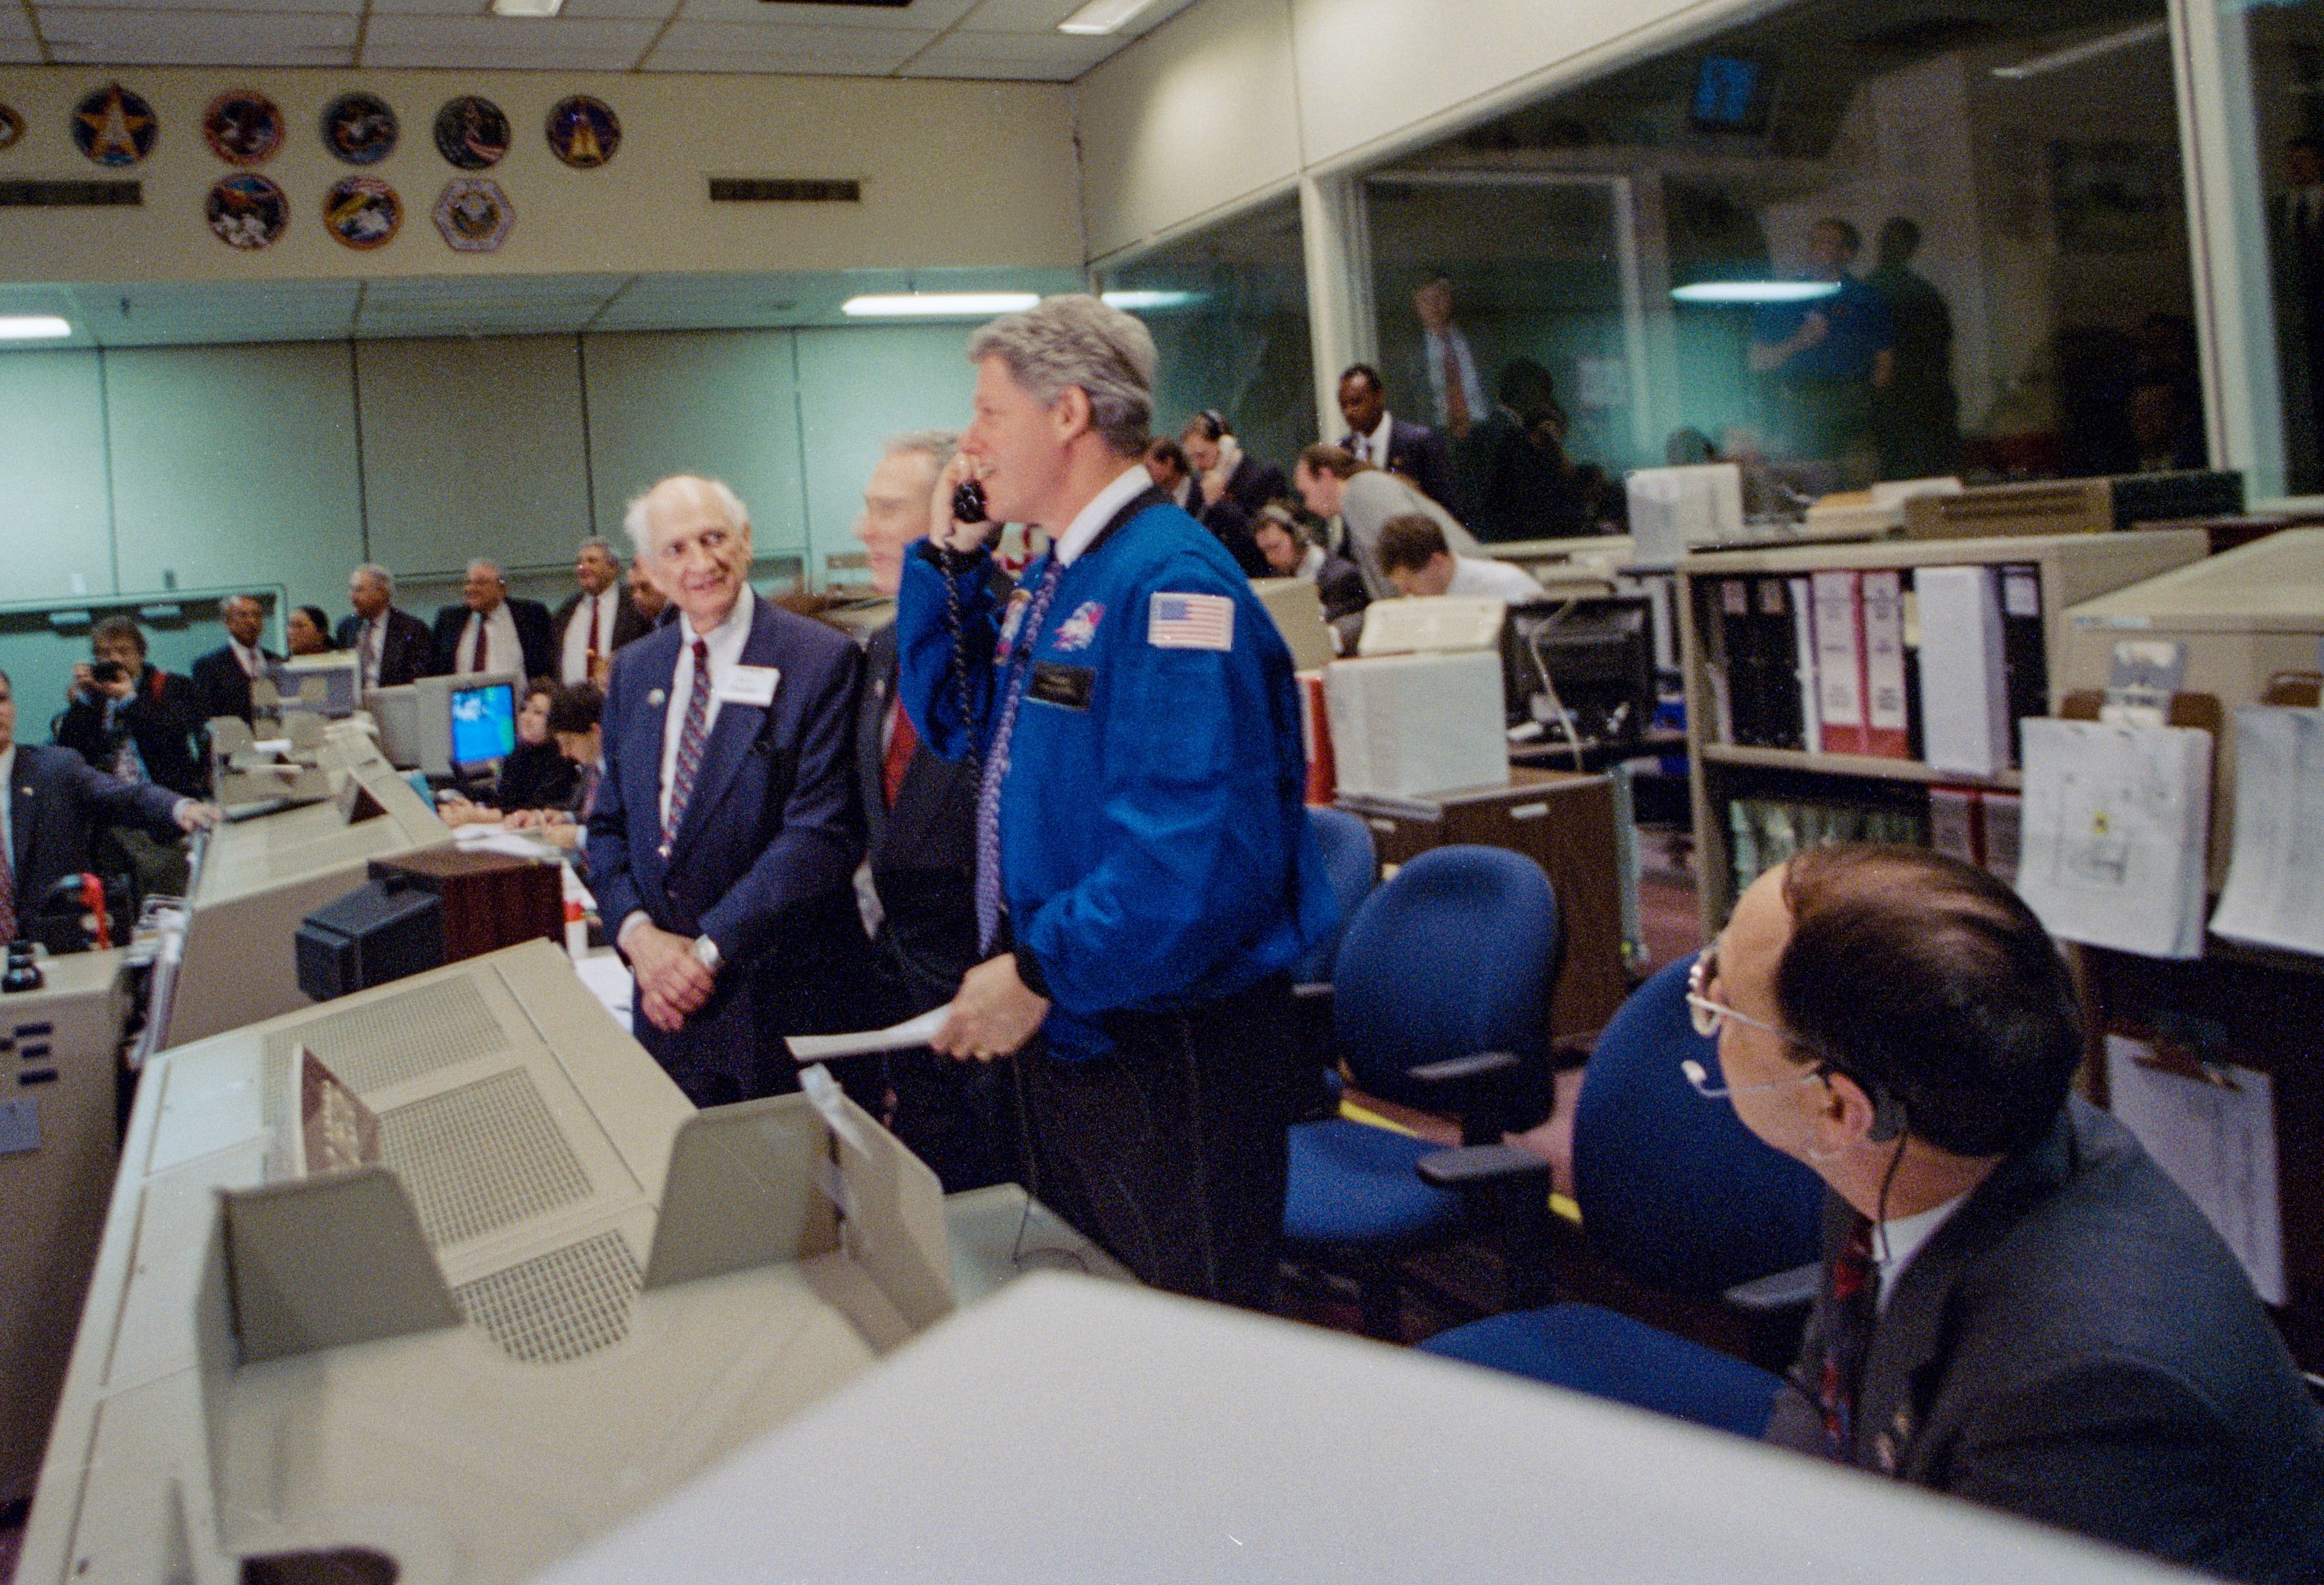 In the Mission Control Center, President William J. “Bill” Clinton chats with the STS-60 crew during his visit to NASA’s Johnson Space Center